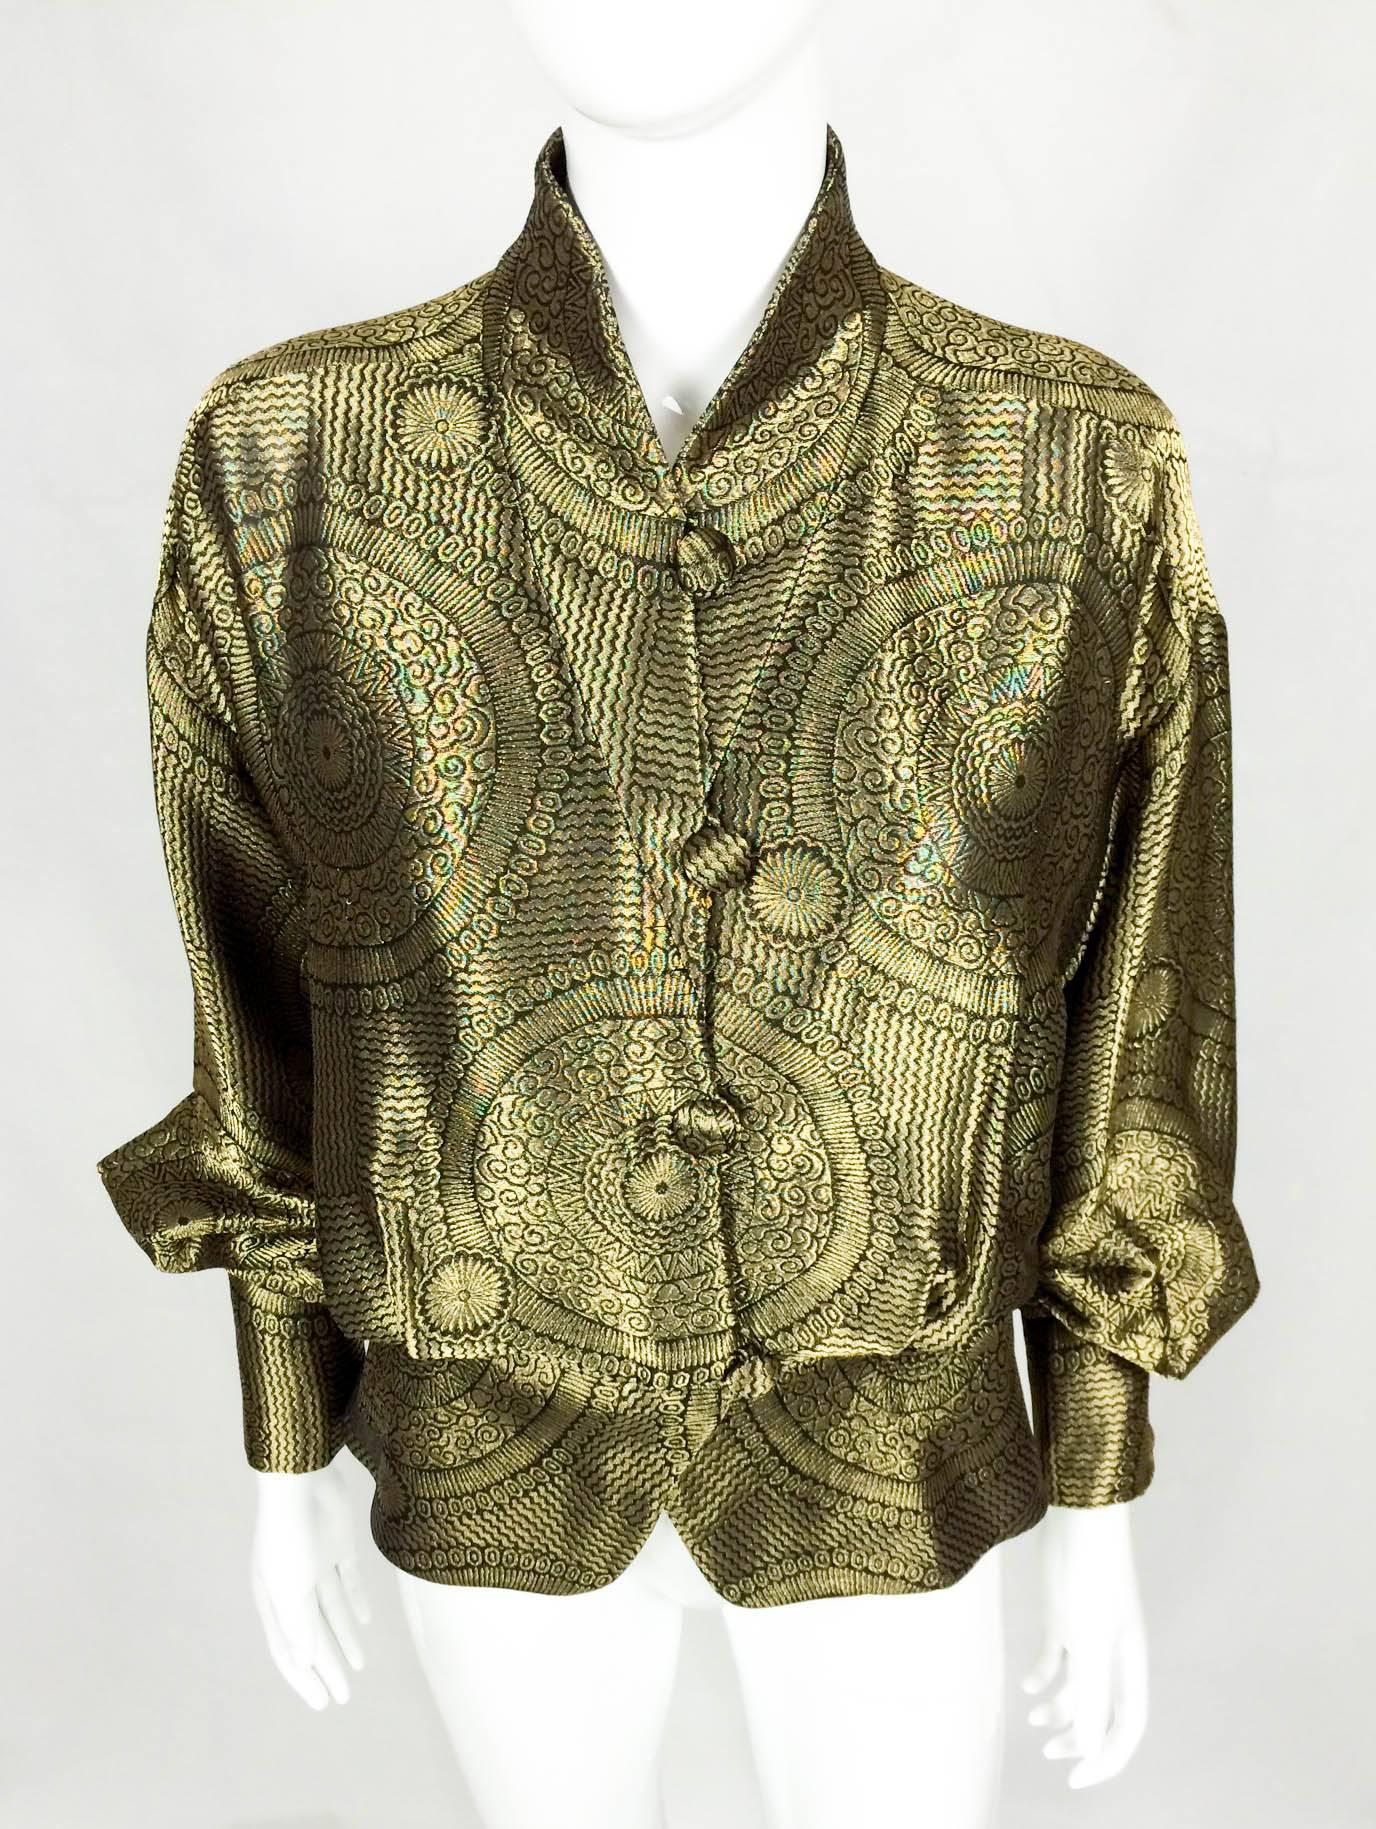 One of a kind Lanvin Silk and Lurex Jacket. This gorgeous 1930s-inspired piece from the late 1980s features a beautiful and elaborate interwoven pattern. Made in silk and lurex, this jacket has four covered buttons down the front and one on each